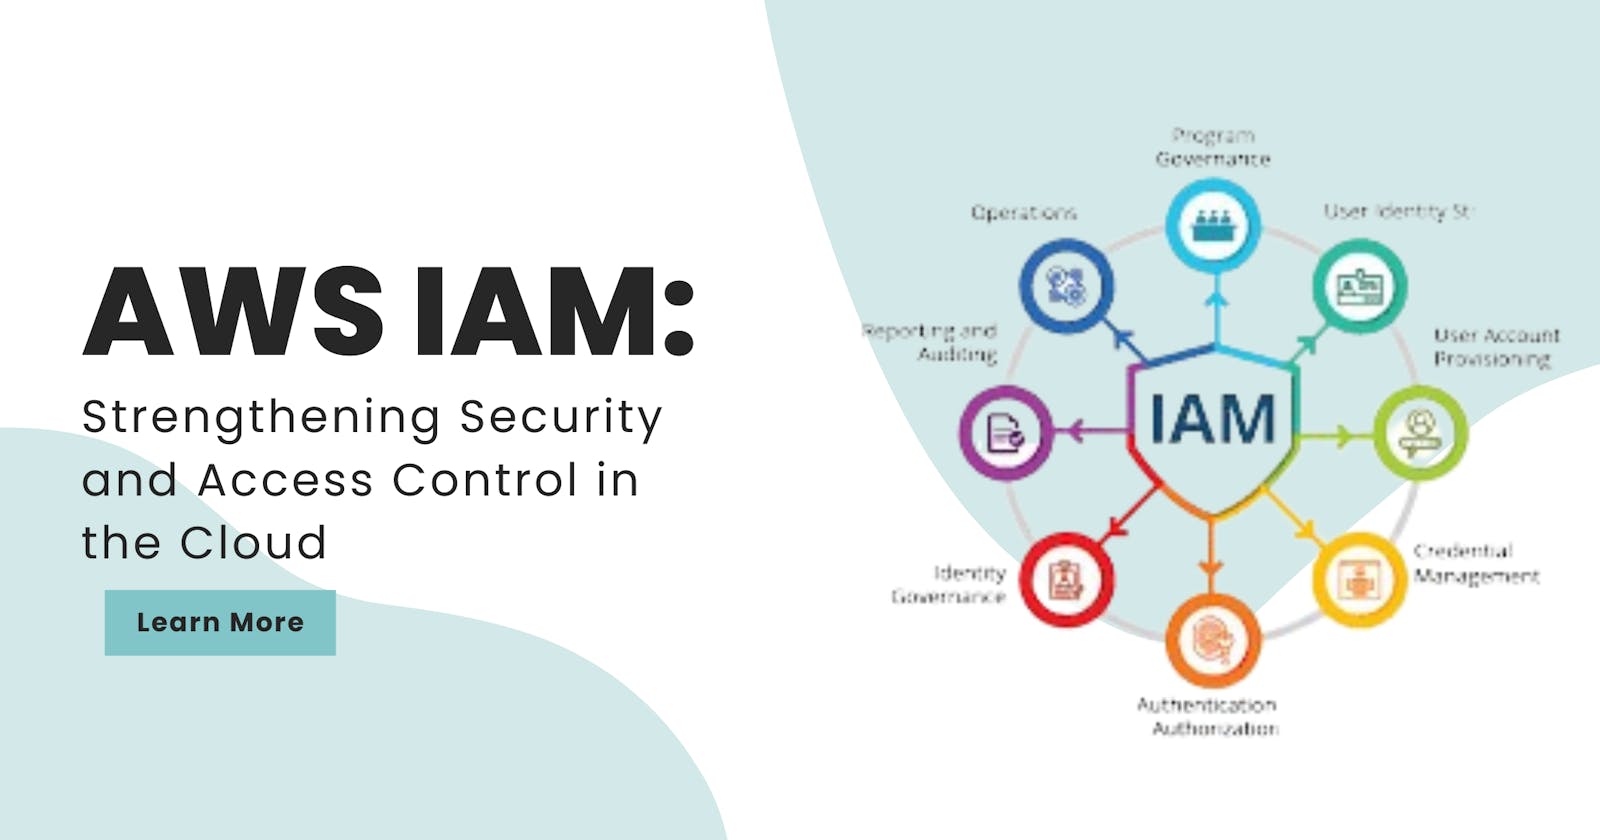 AWS IAM: Strengthening Security and Access Control in the Cloud